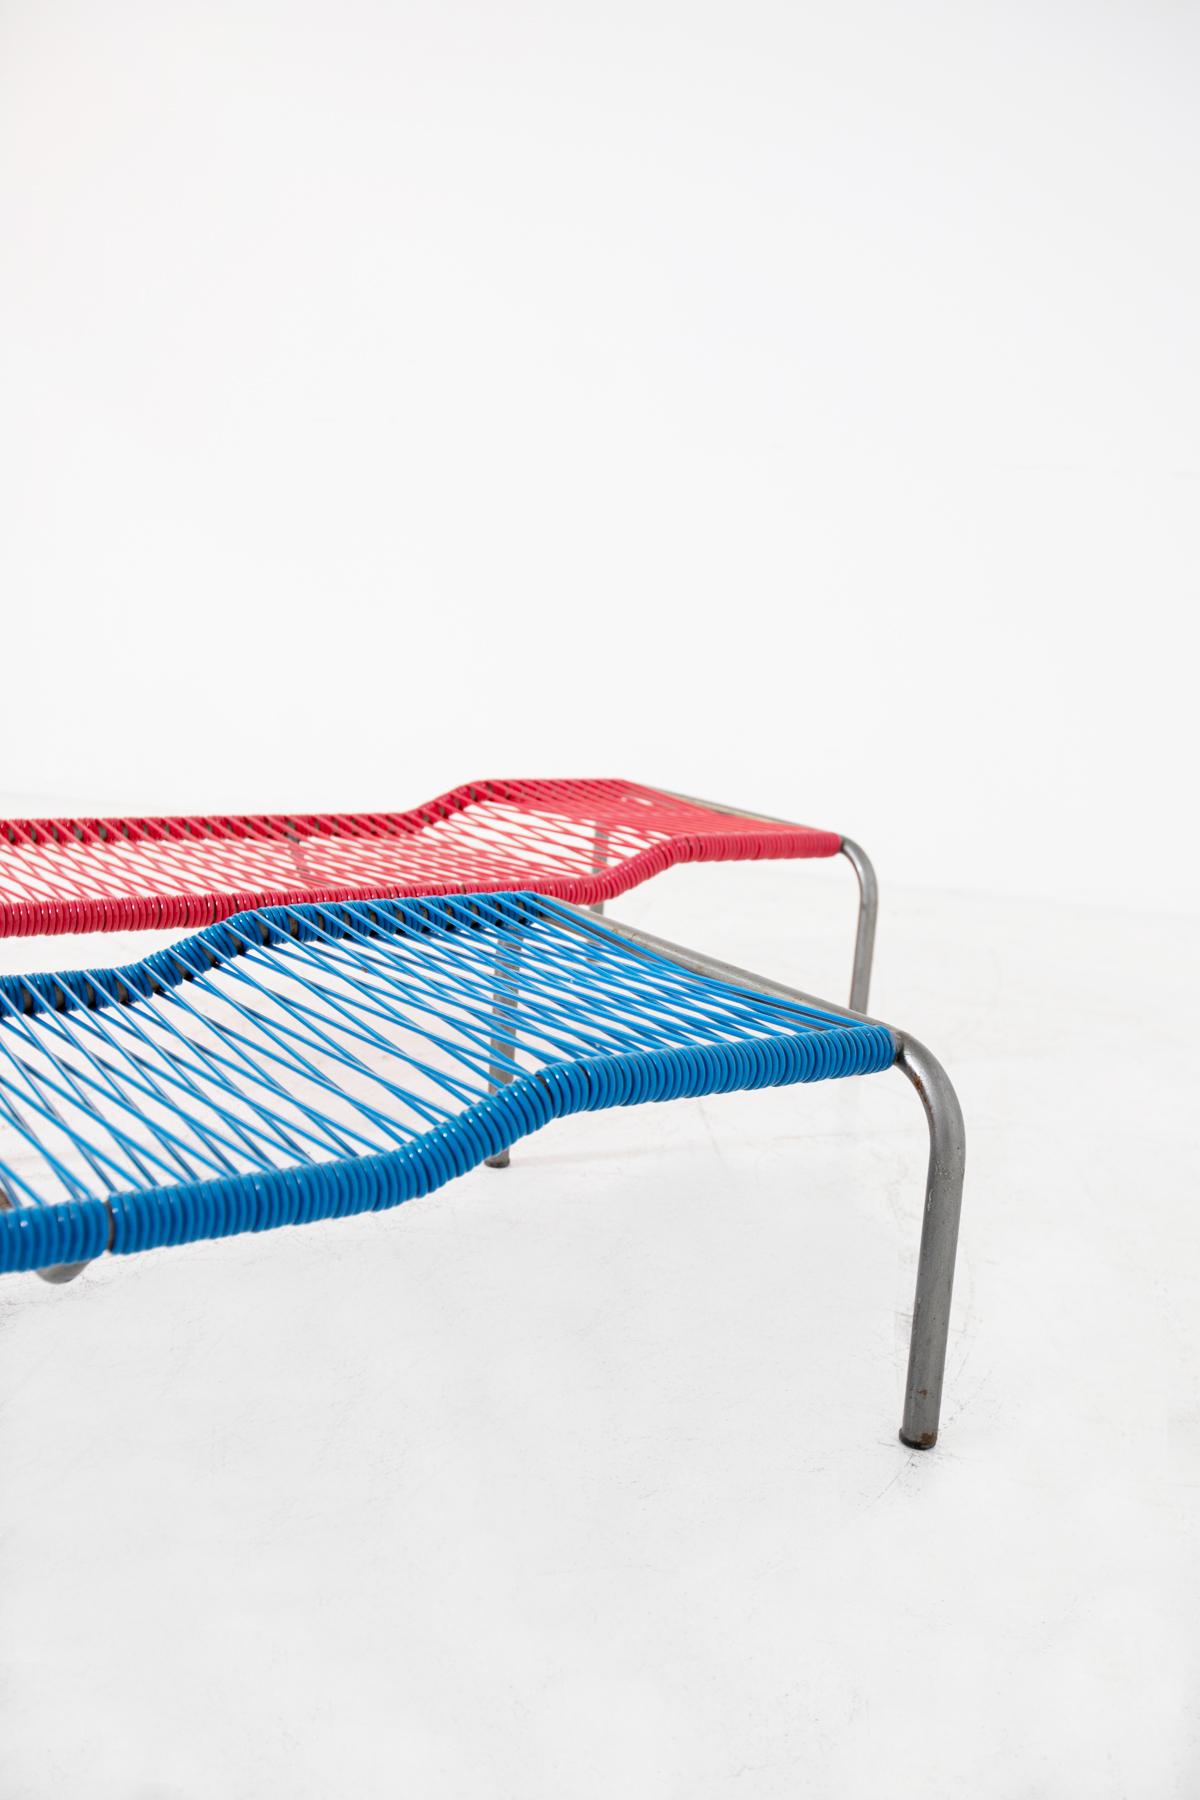 Pair of Italian Iron and Plastic Deckchairs Red and Blue 3